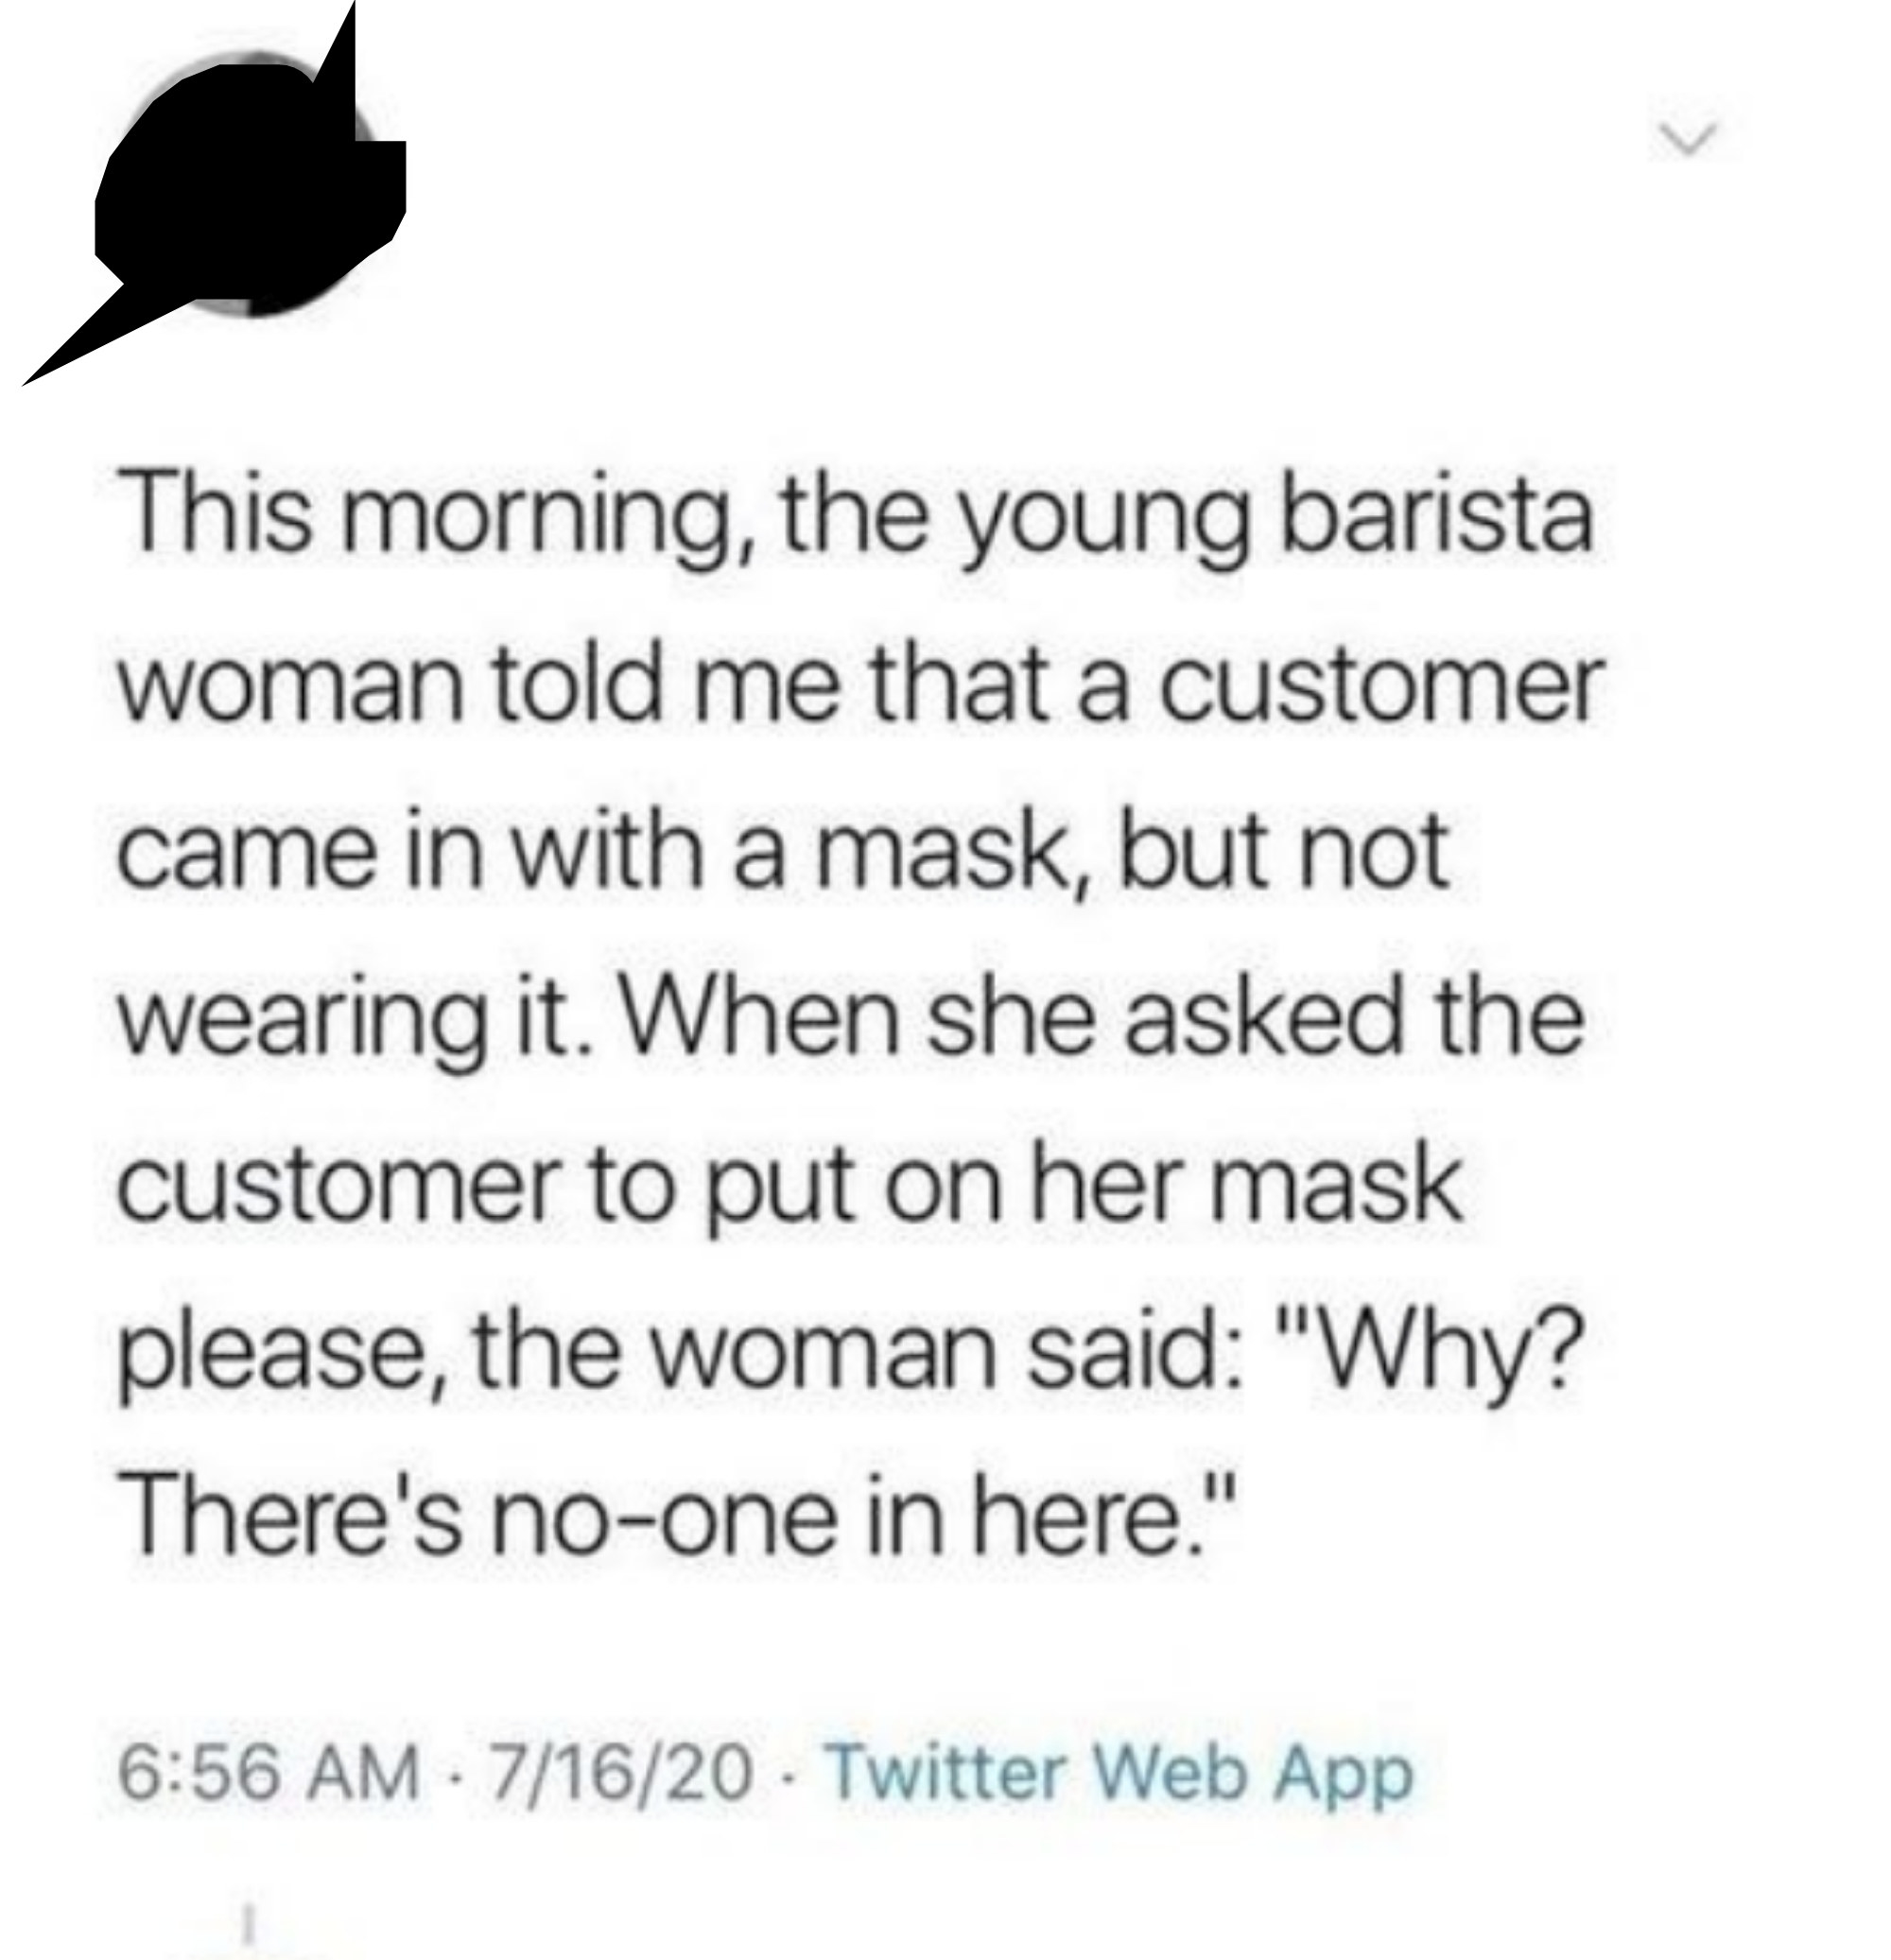 A customer has a mask but isn&#x27;t wearing it, the barista asks why, and the customer says &quot;there&#x27;s no one in here&quot;